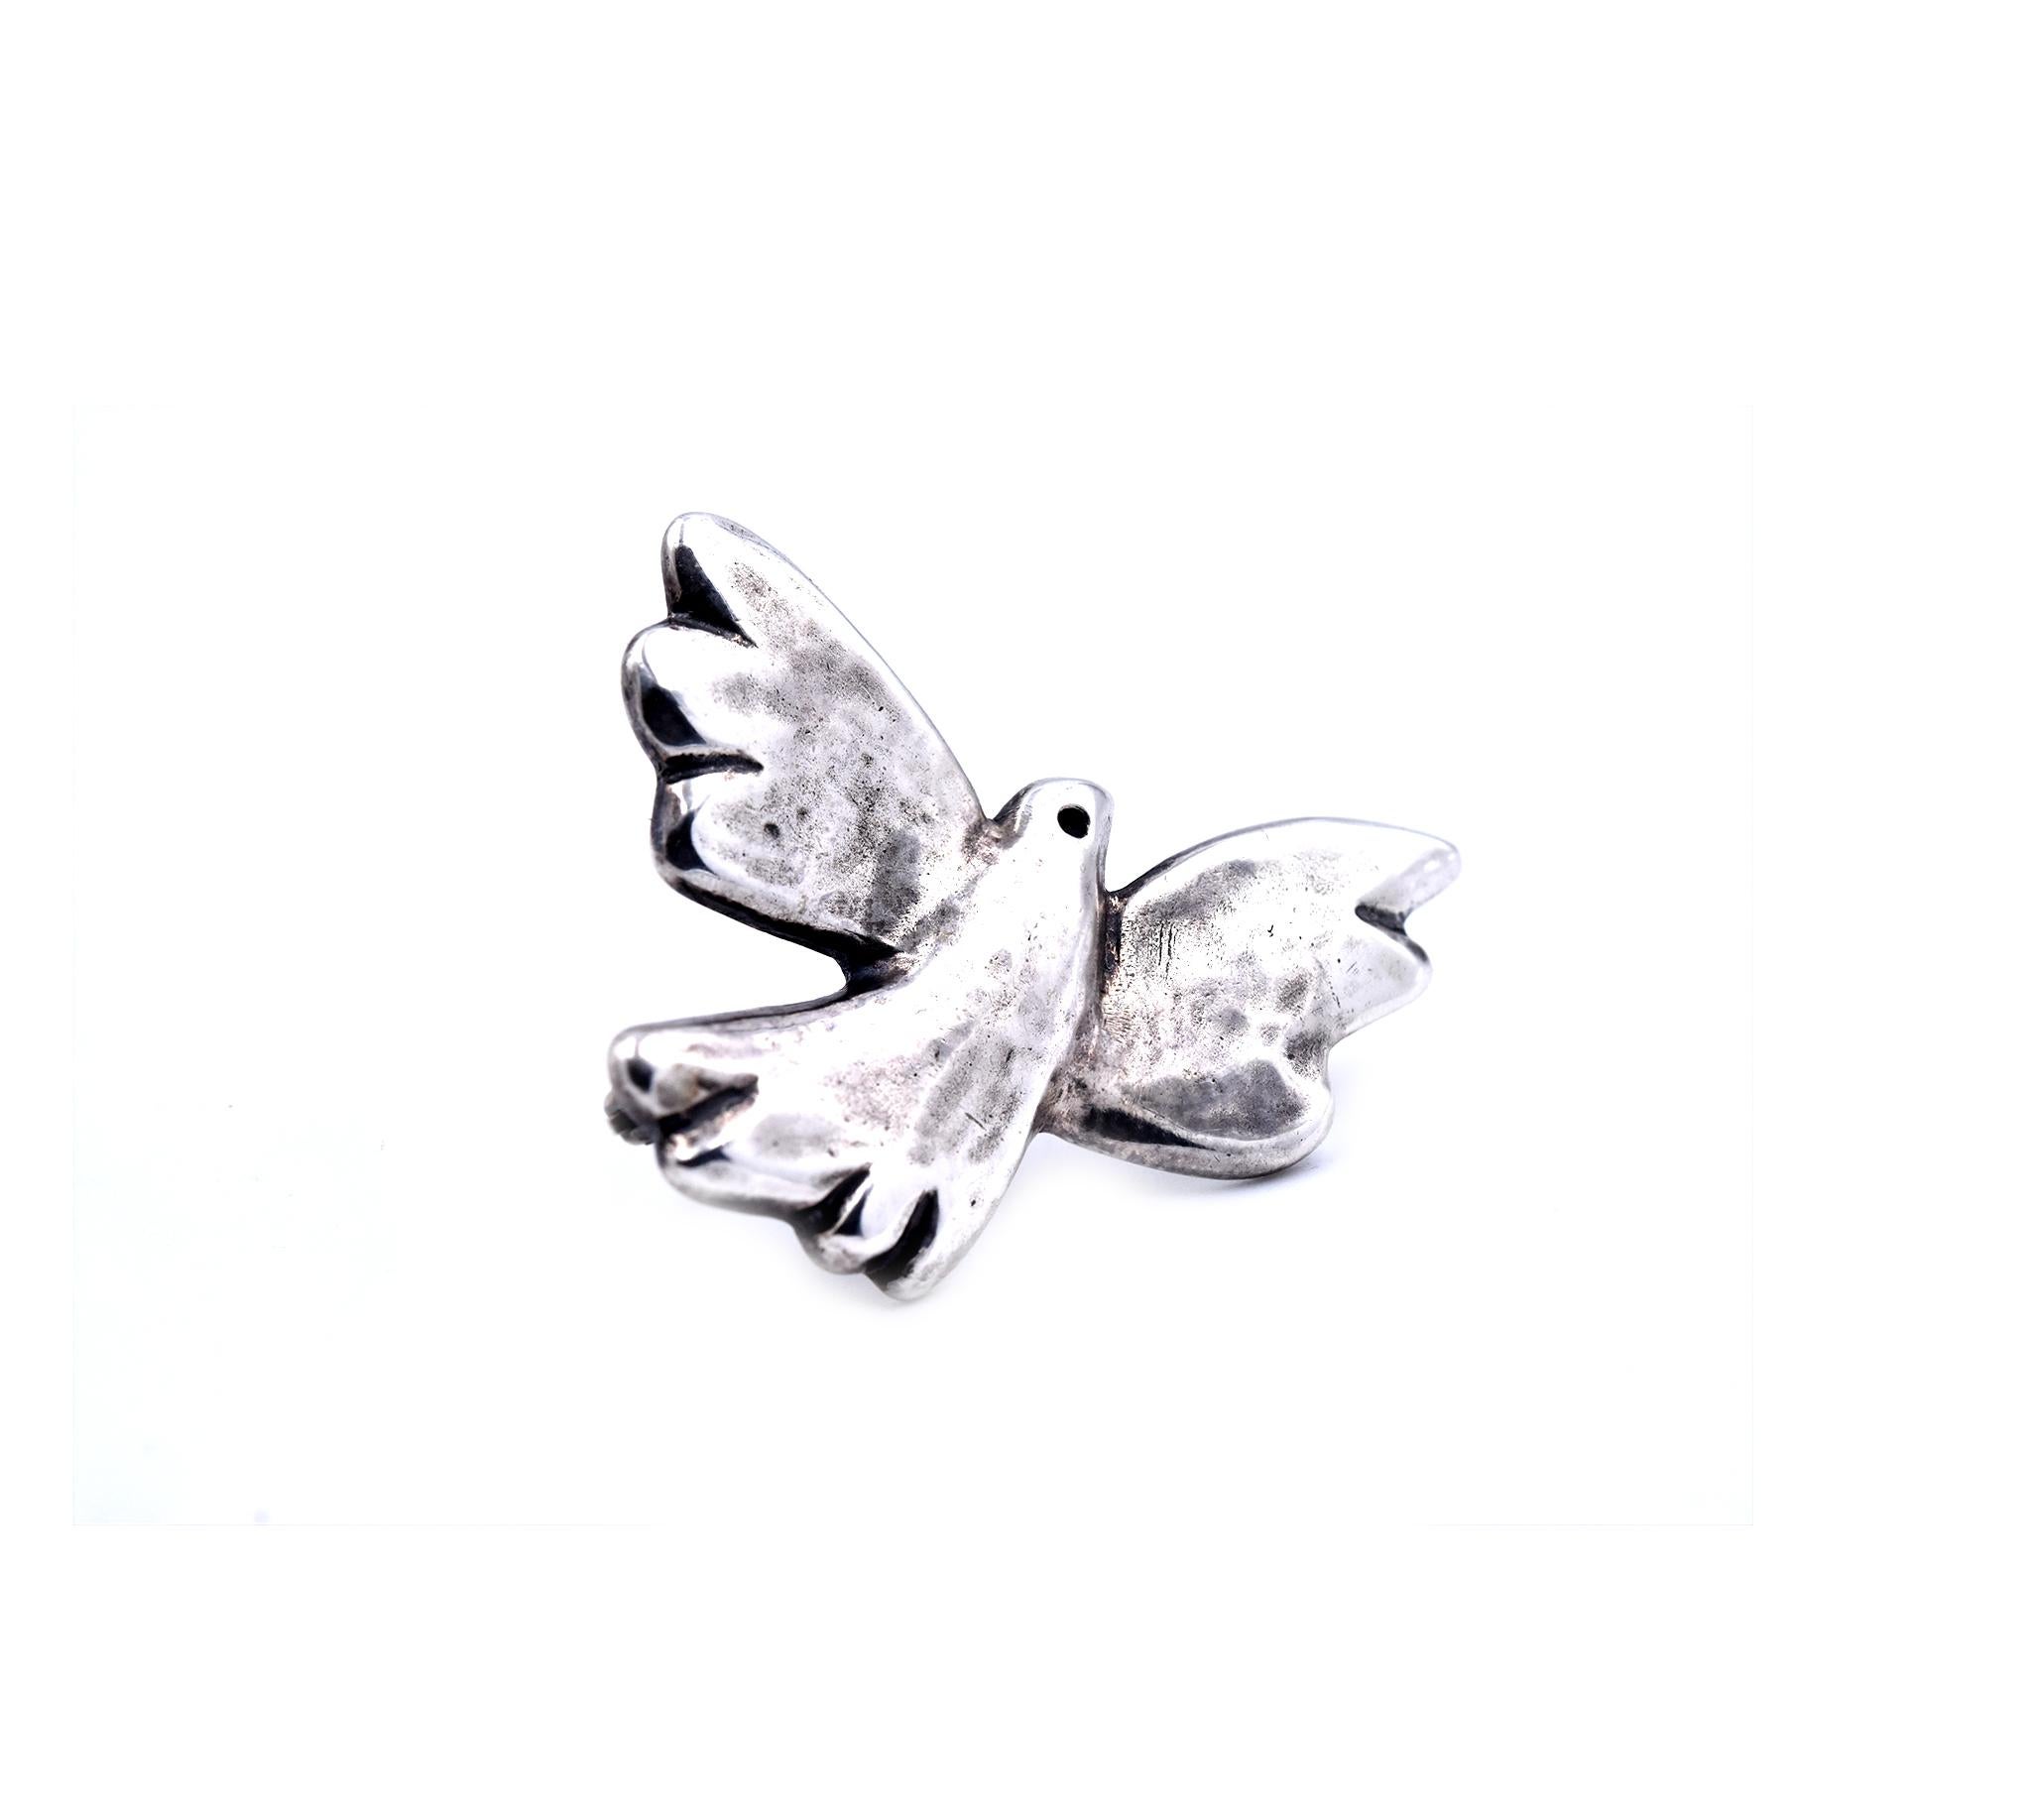 Designer: James Avery
Material: sterling silver
Dimensions: pin measures 39.60mm x 27.85mm
Weight: 12.2 grams
